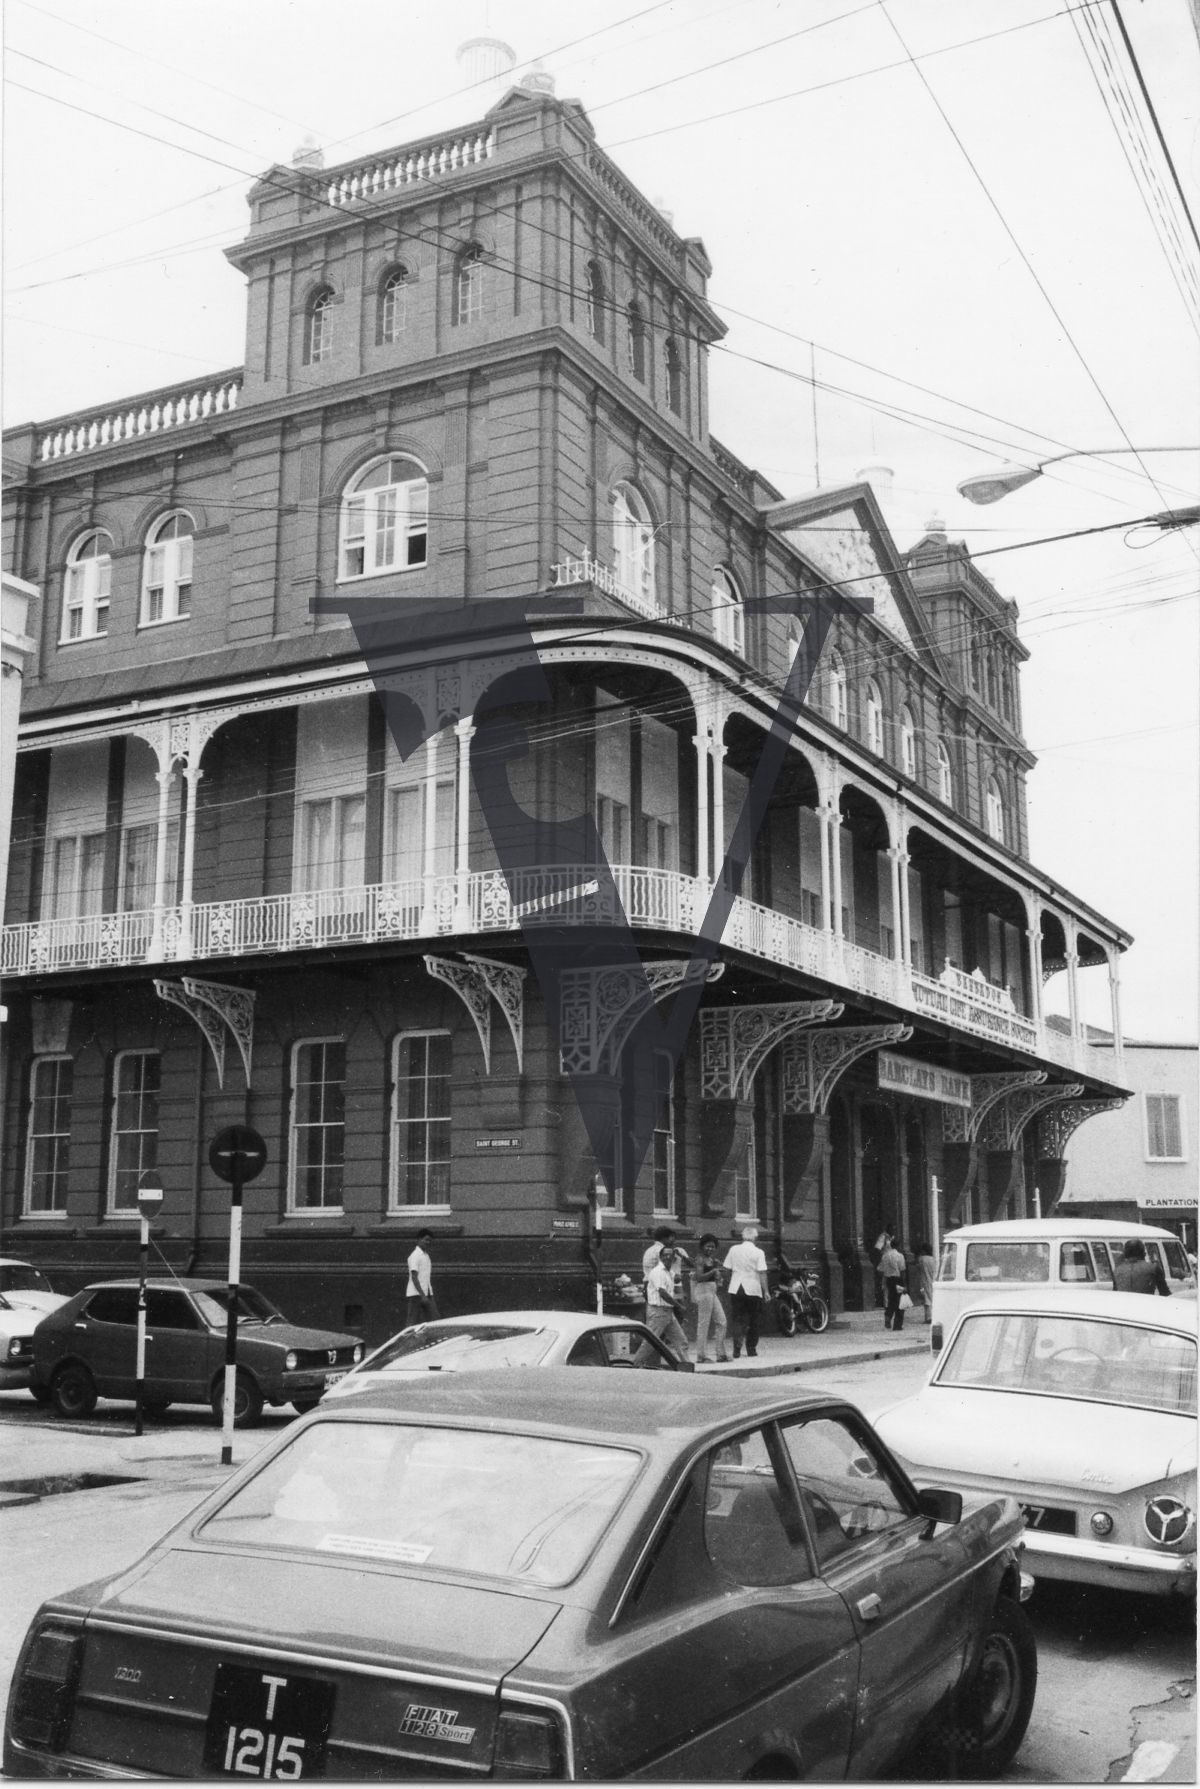 Barbados, colonial age building, Saint George Street, Mercedes and Fiat cars.